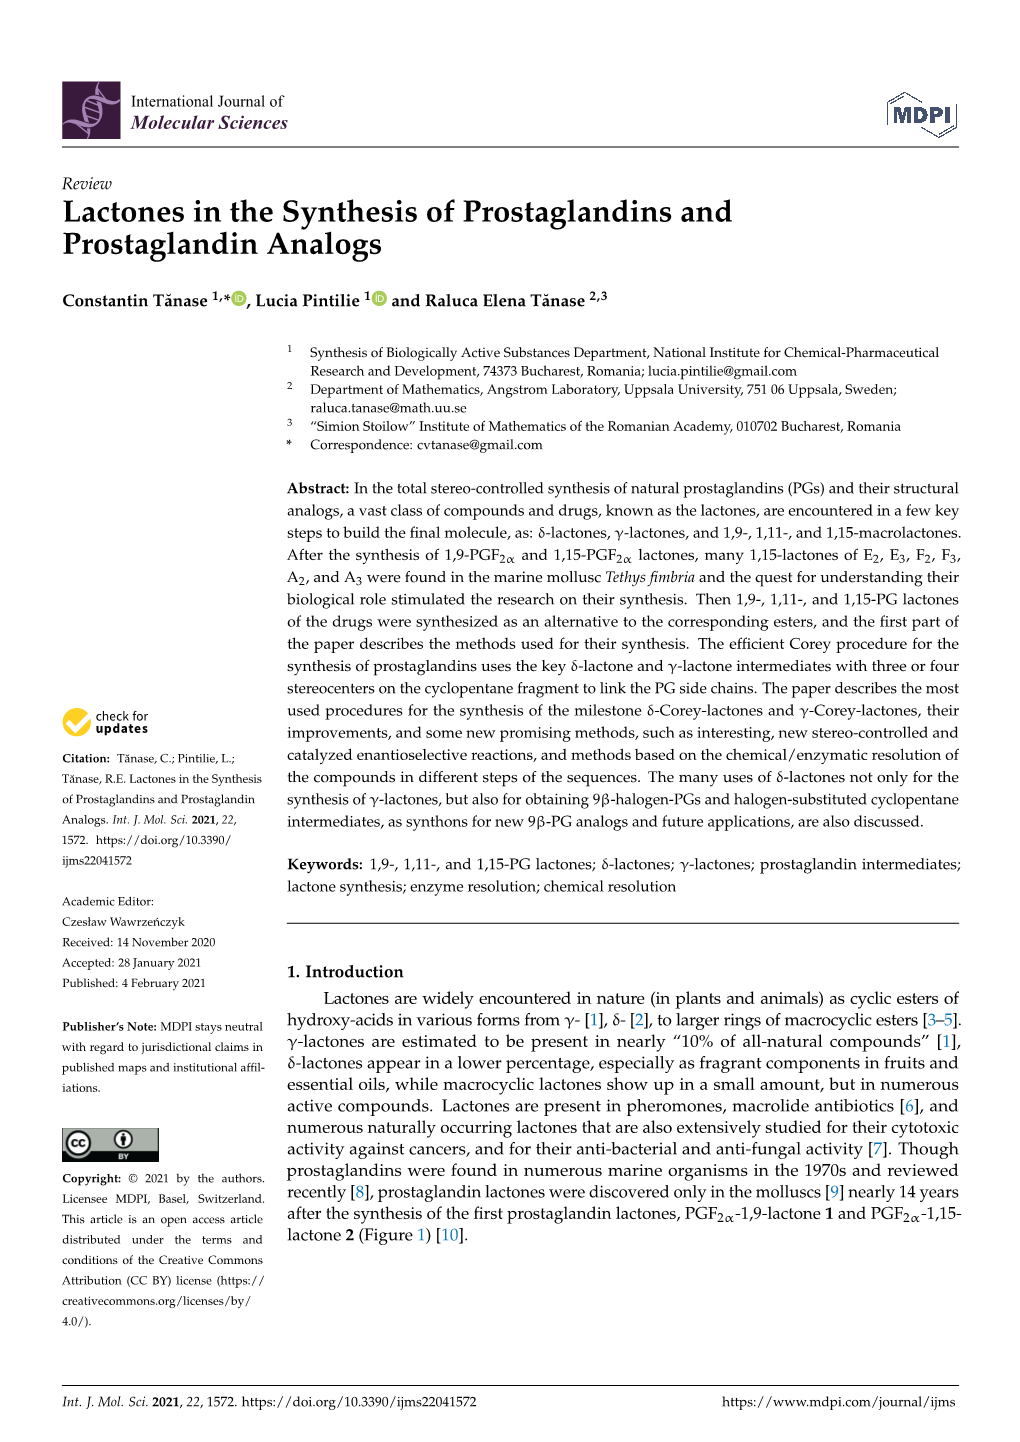 Lactones in the Synthesis of Prostaglandins and Prostaglandin Analogs